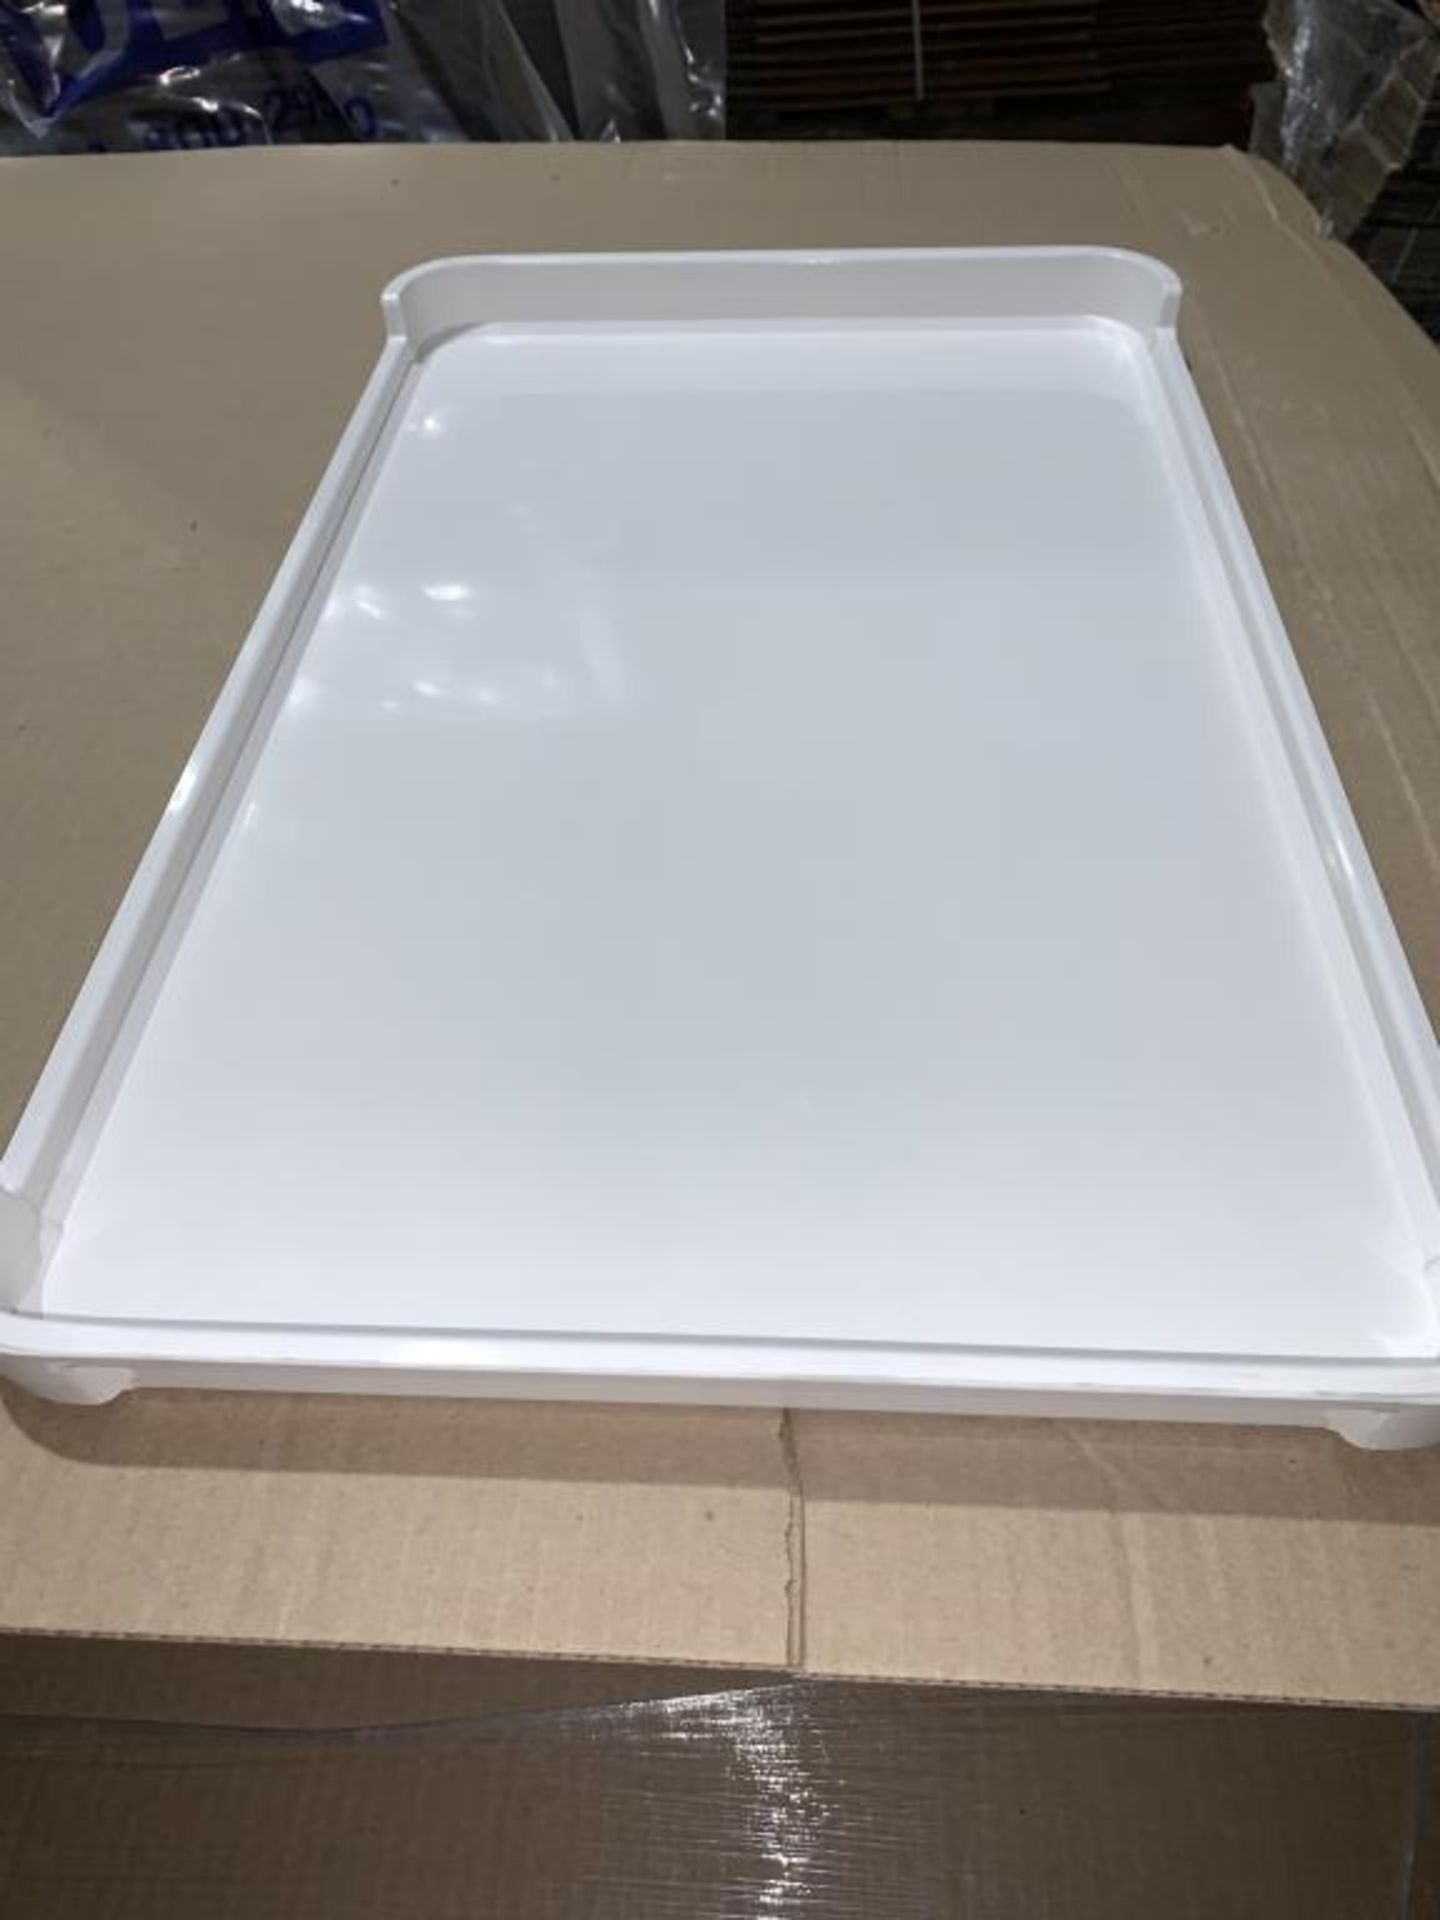 Softgel Drying Trays - Image 4 of 10